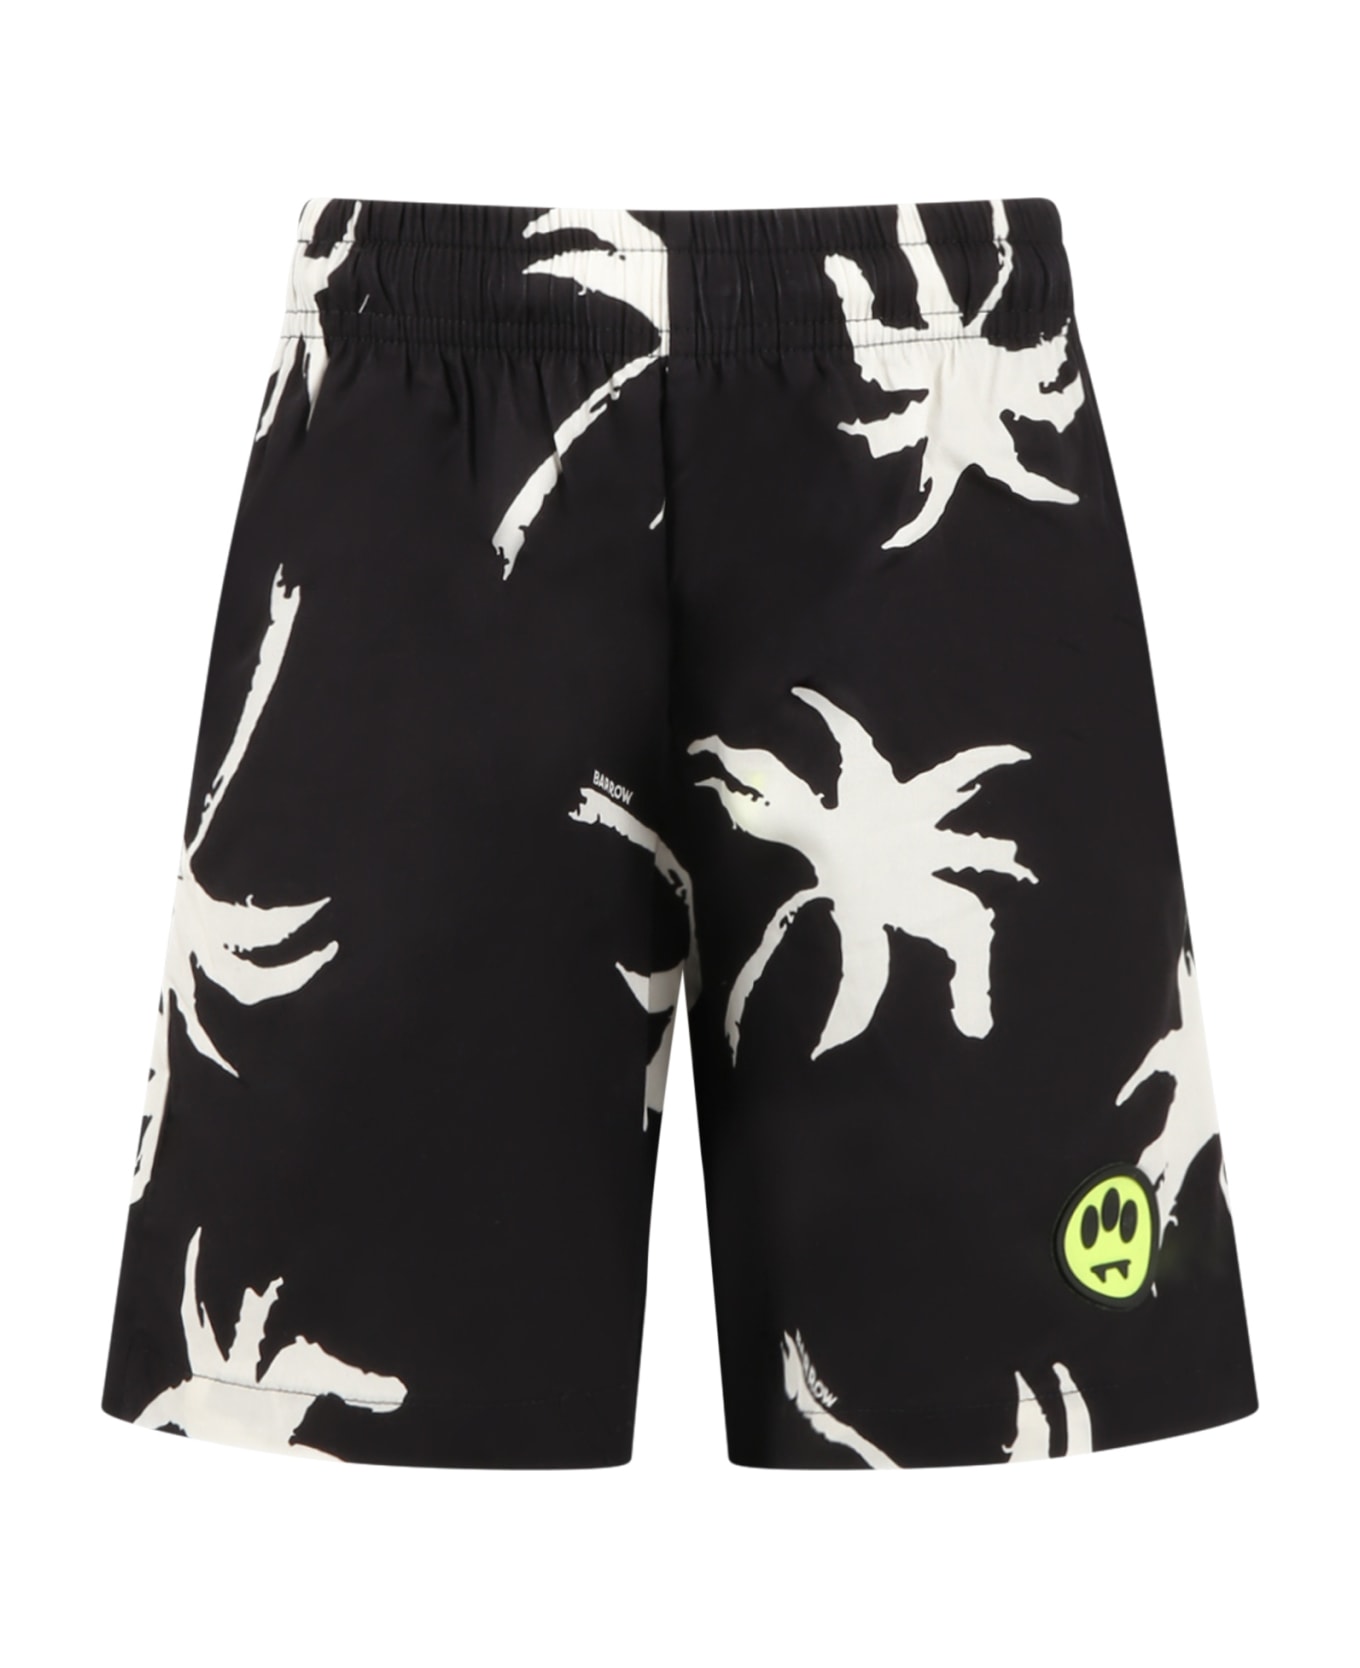 Barrow Black Shorts For Boy With Palm Trees - Nero